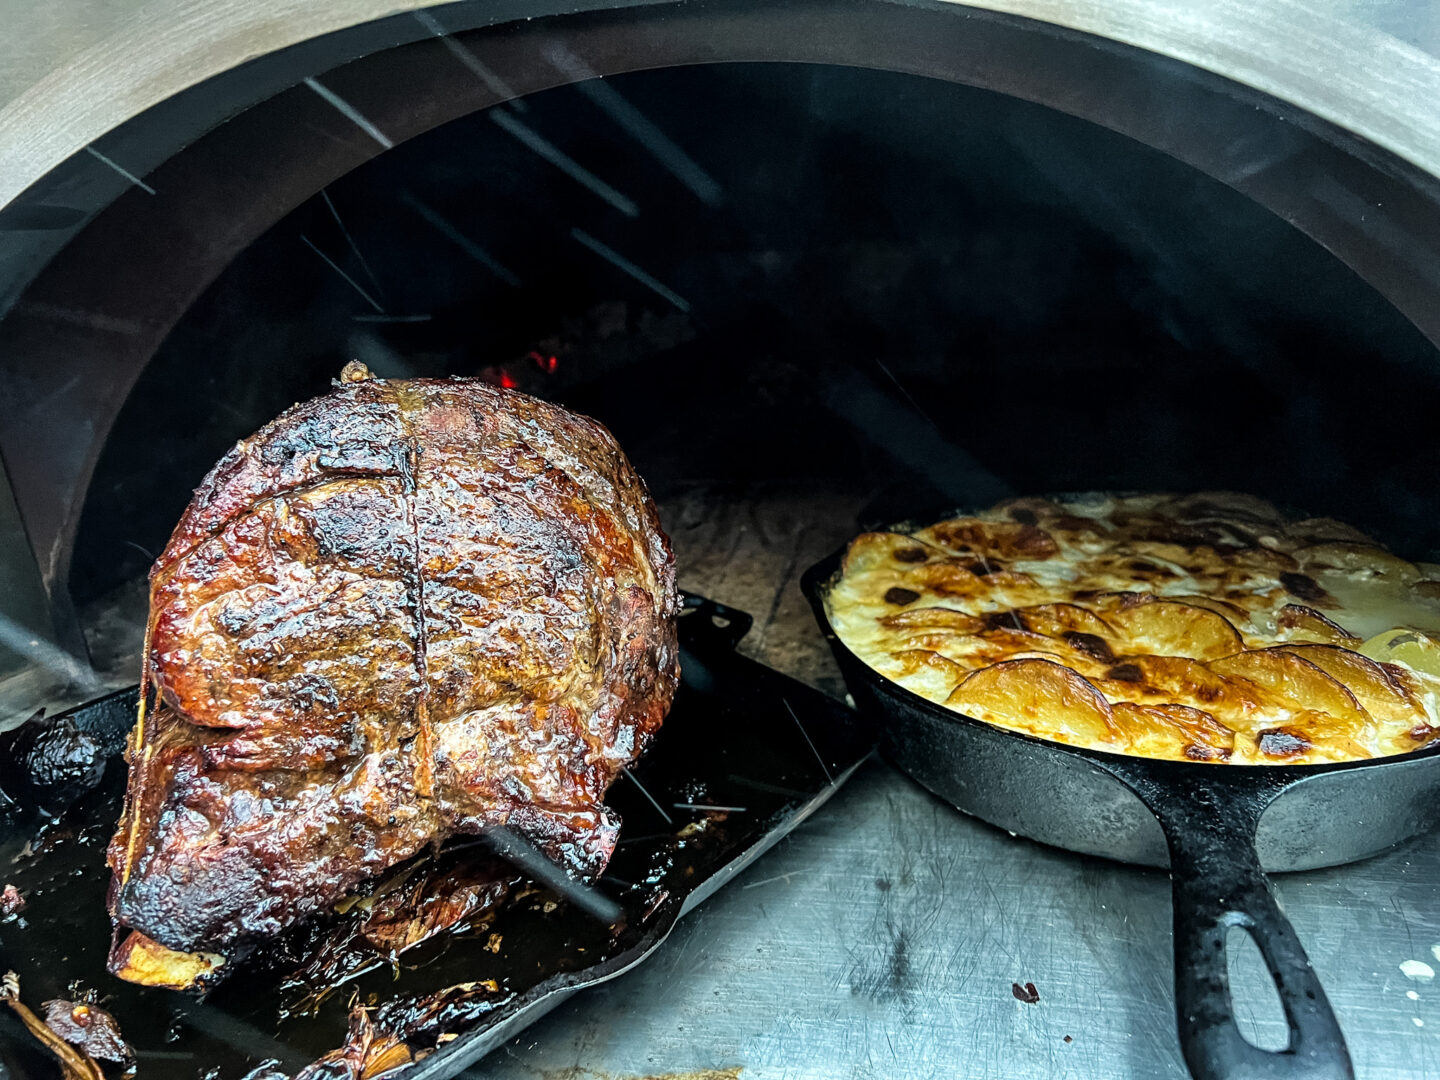 Prime rib and gratin in pizza wood fire oven